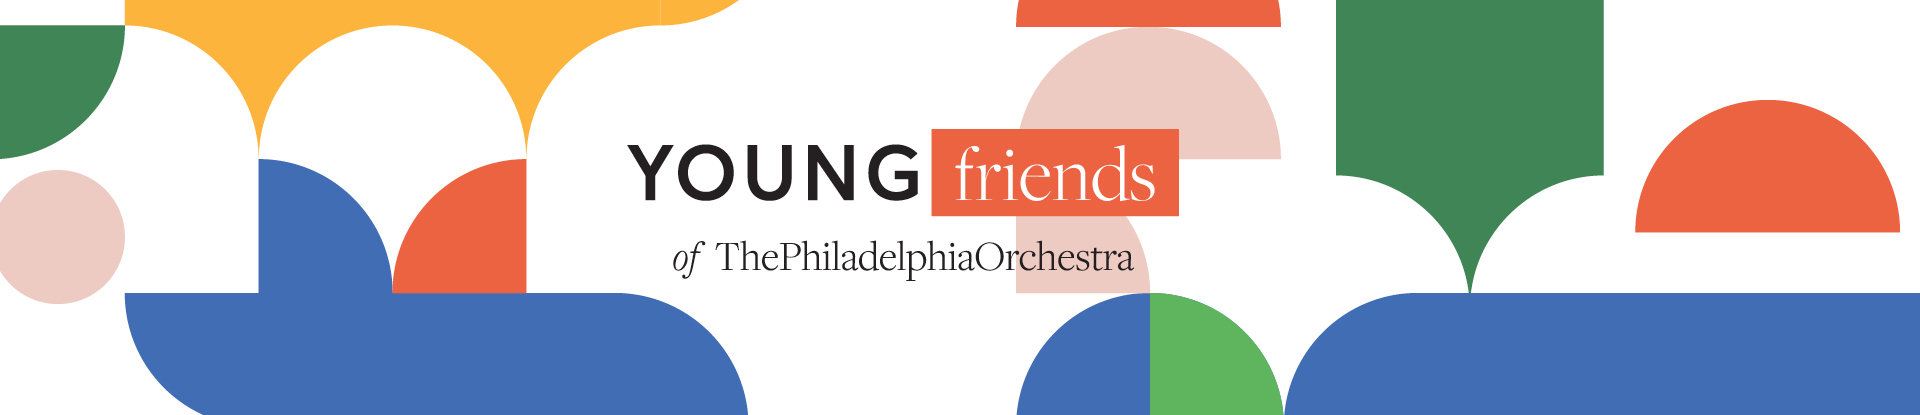 Young Friends banner